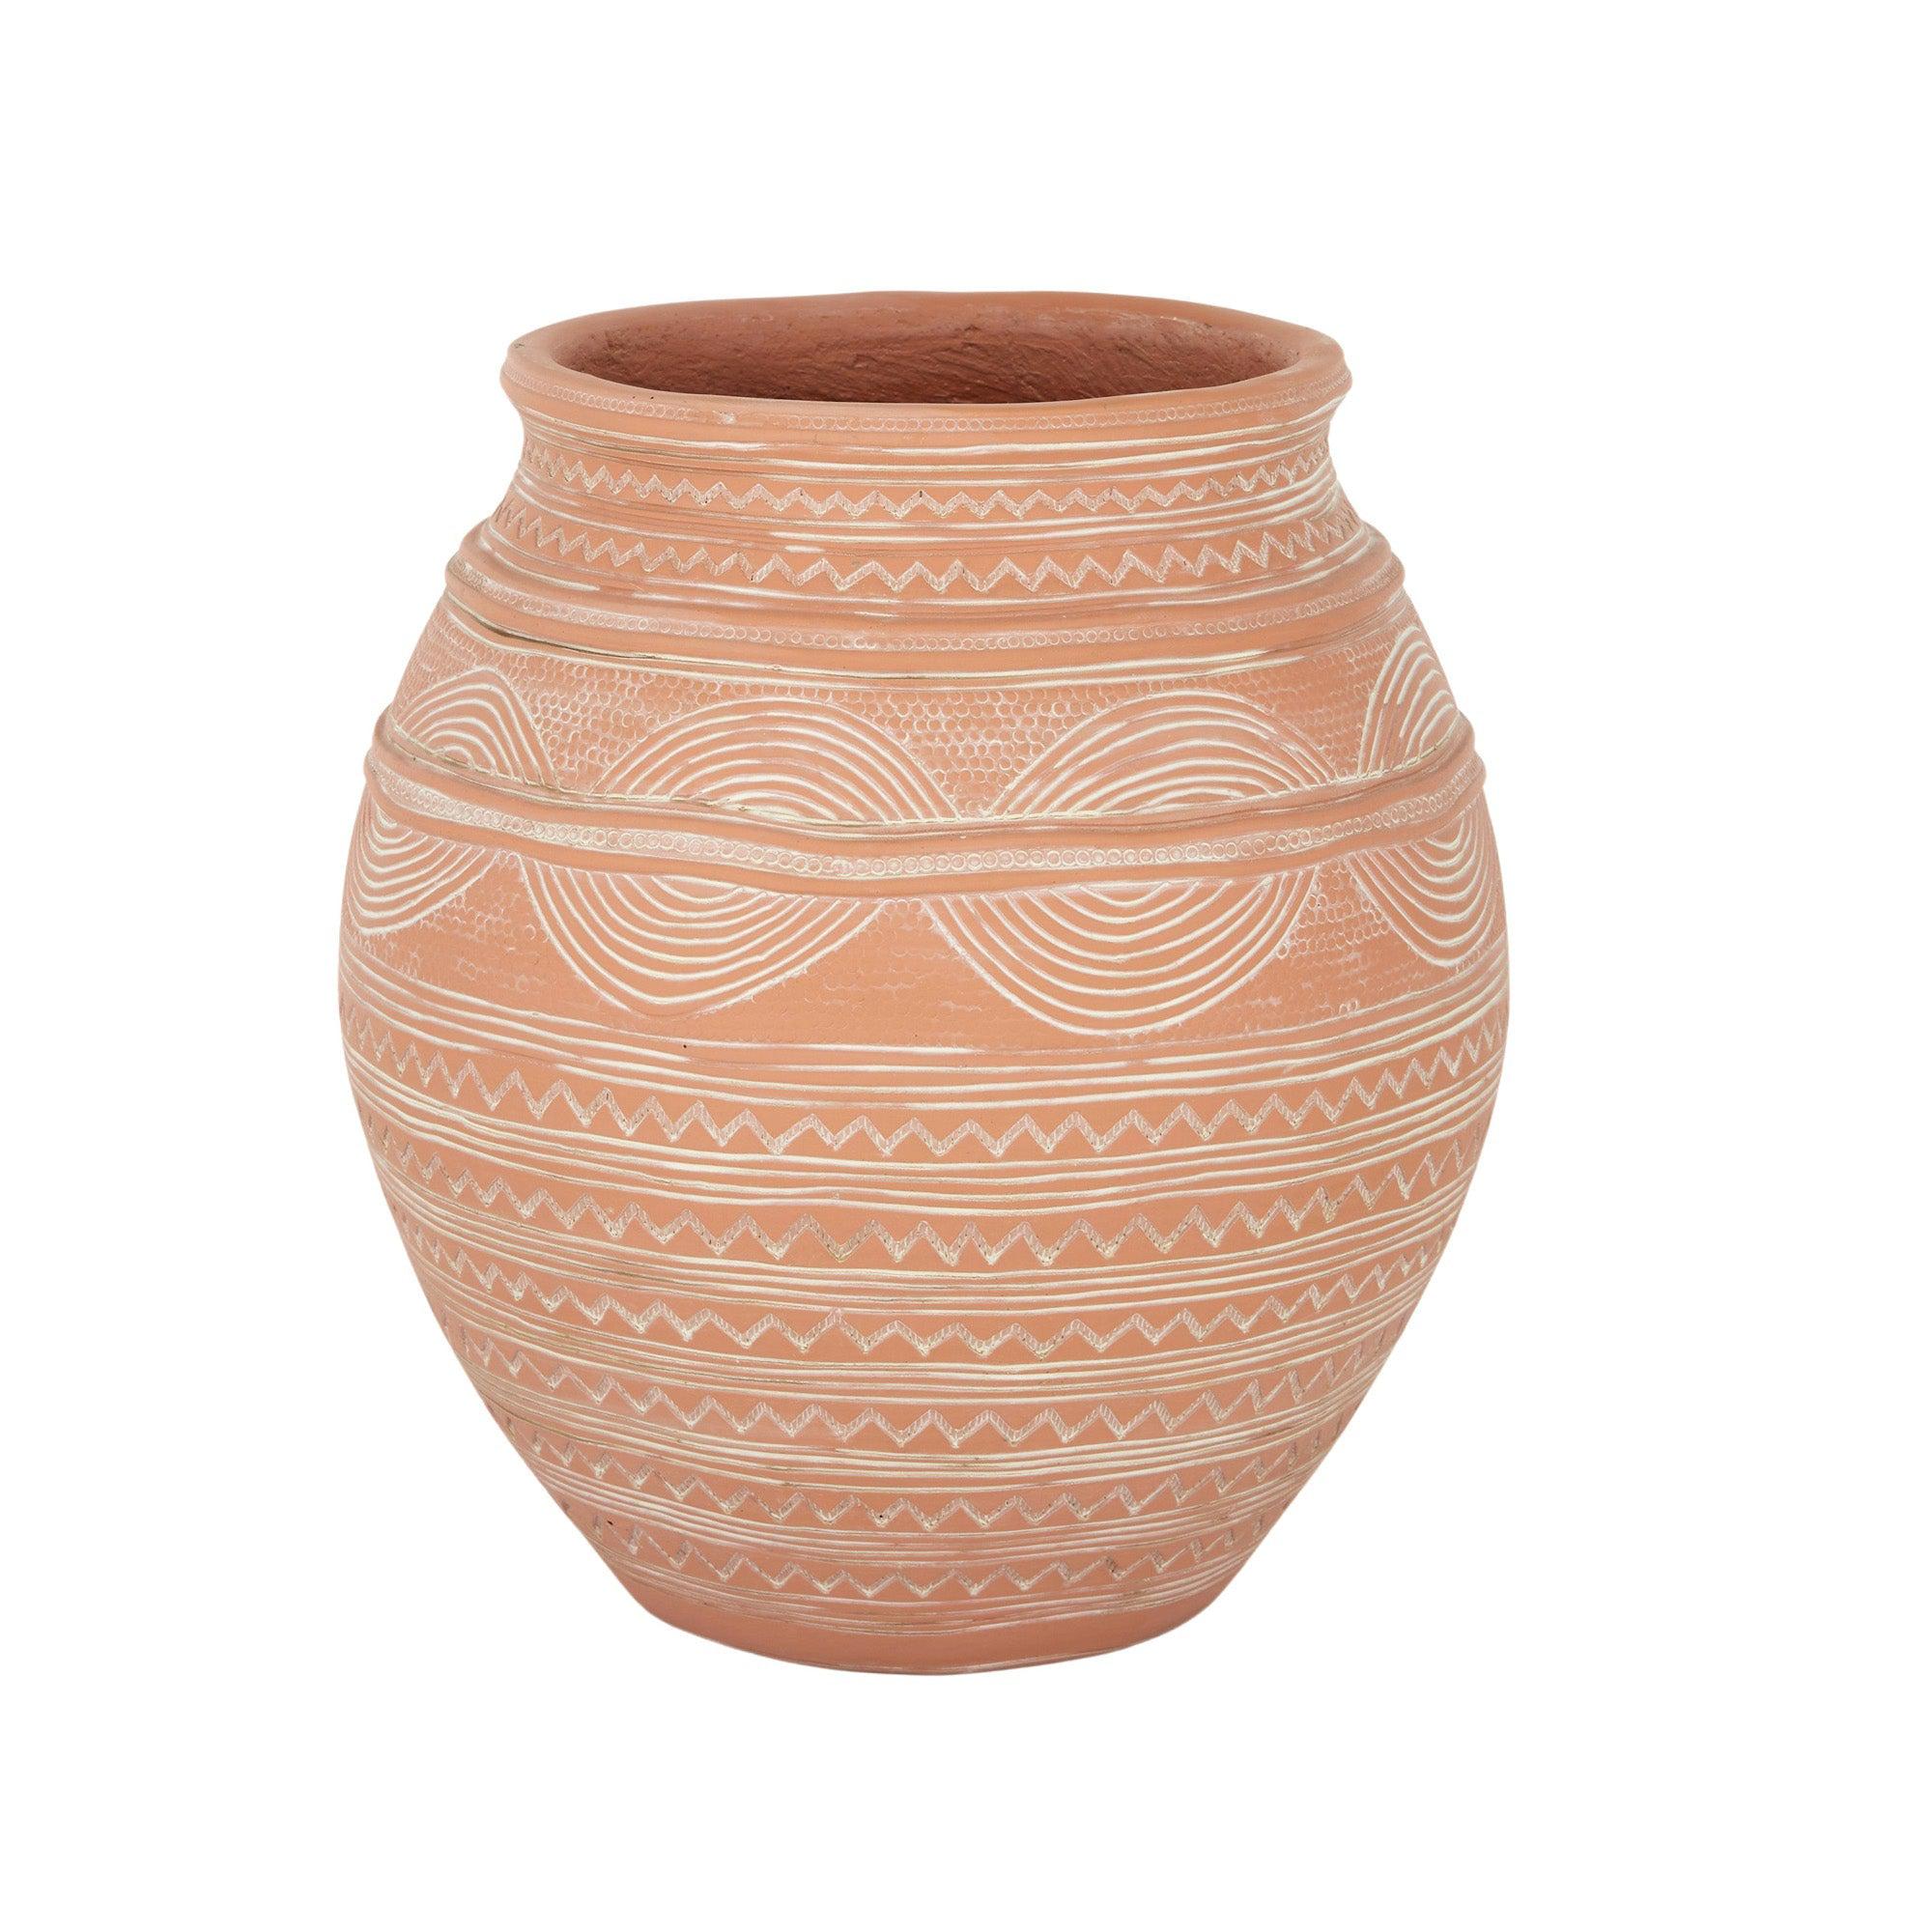 Luthando Cement Pot-Pots, Planters & Vases-Coast To Coast Home-The Bay Room